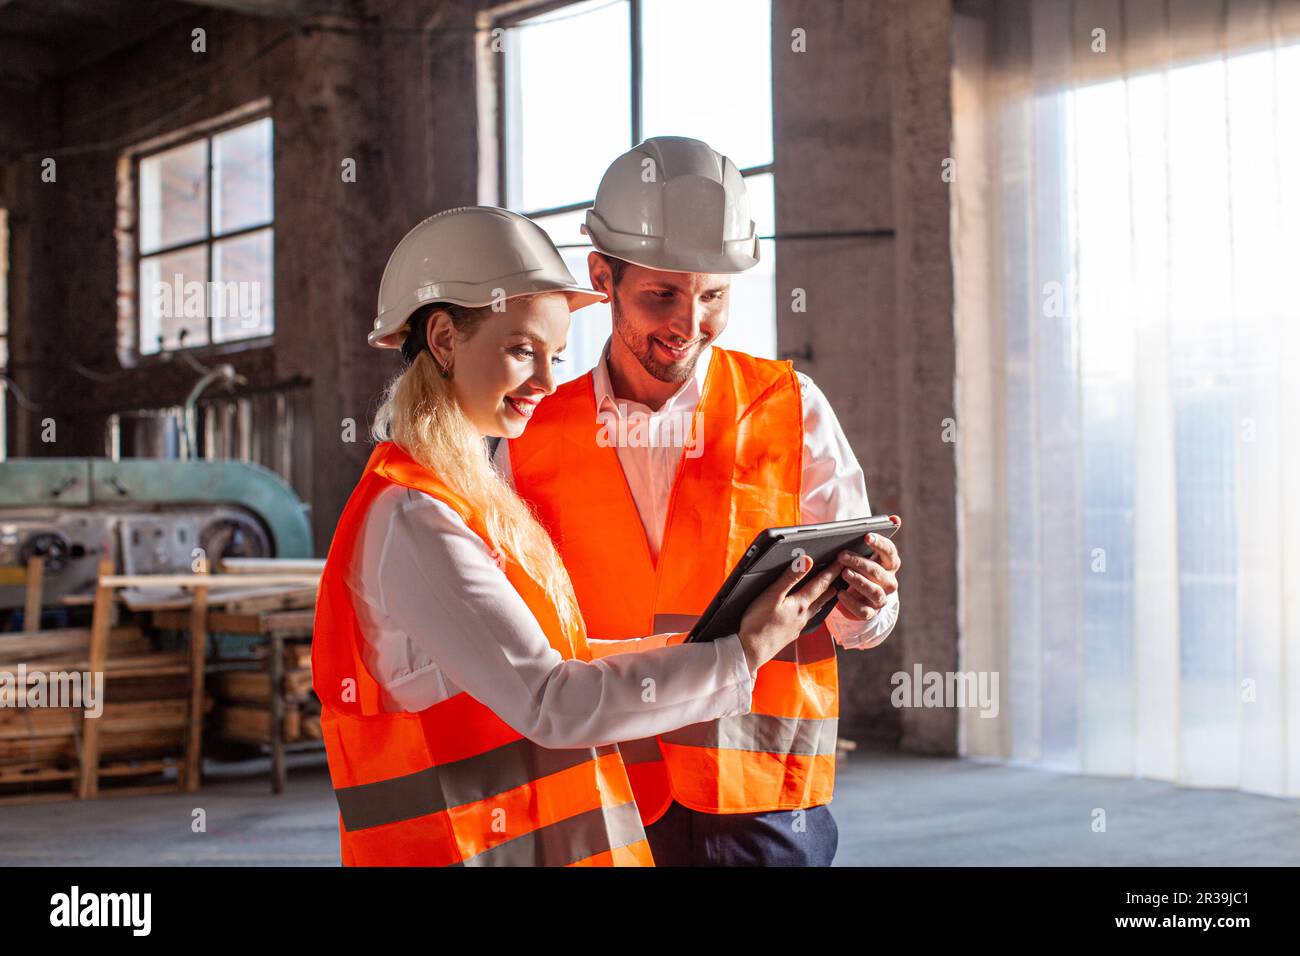 Young professional people with helmets working in quality control in warehouse Stock Photo